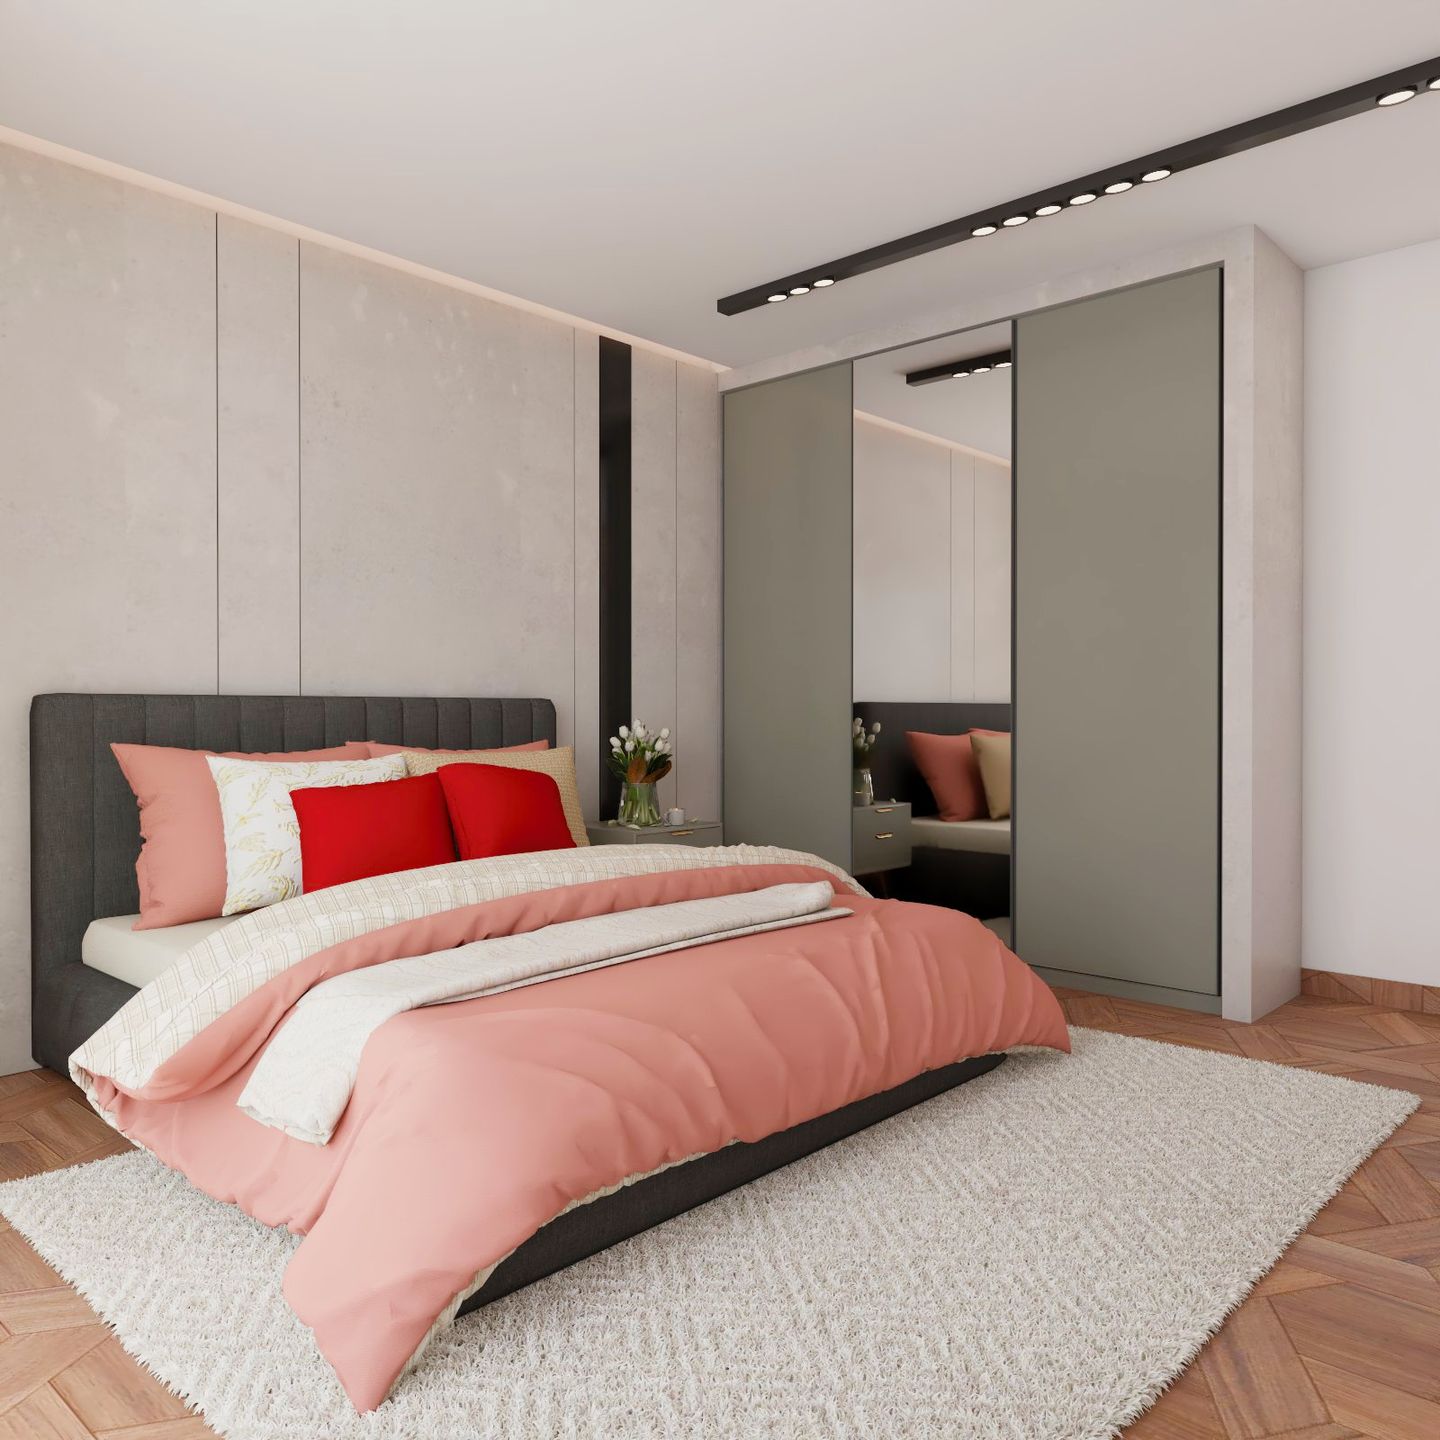 Spacious Contemporary Bedroom Design With Queen-Size Grey Bed With Peach Upholstery And 3-Door Sliding Mirrored Wardrobe - Livspace